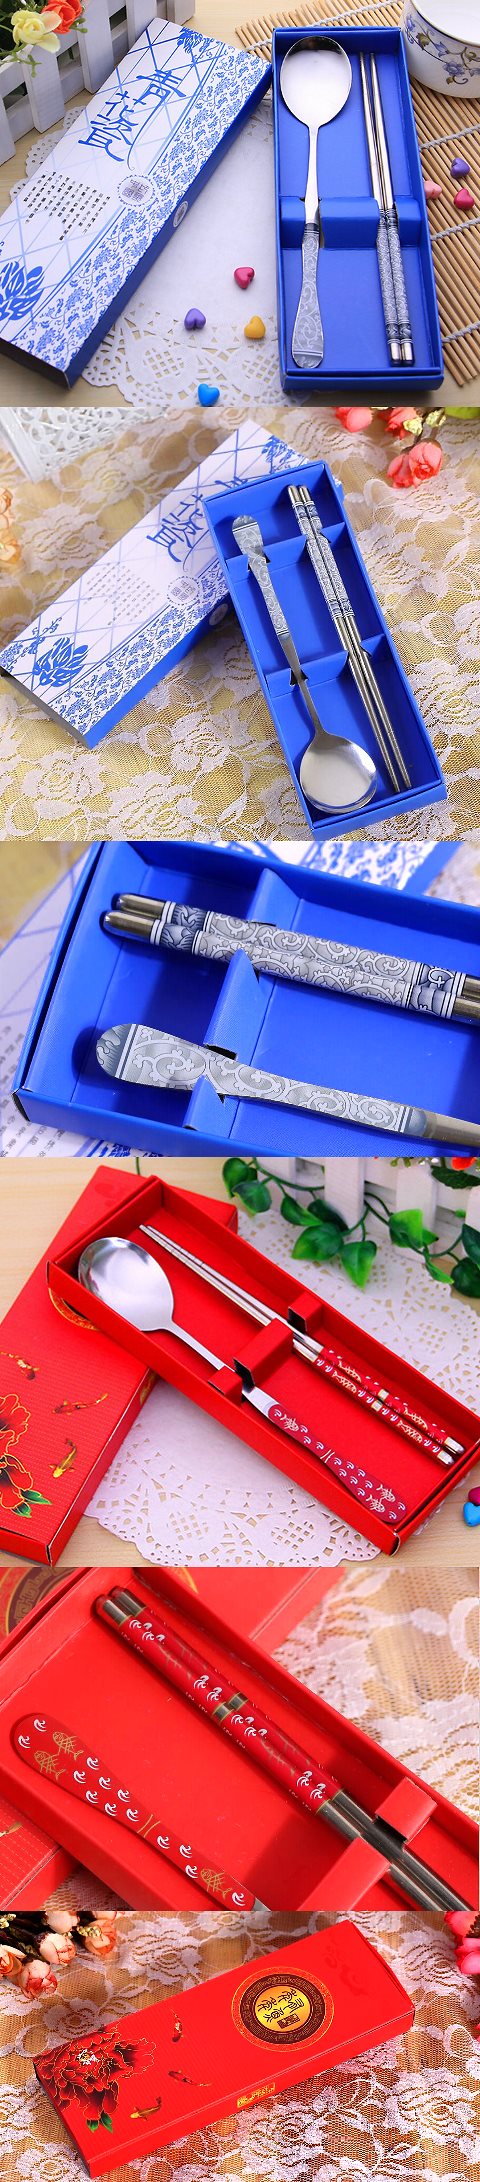 Stainless Steel Spoon and Chopsticks Cutlery Set